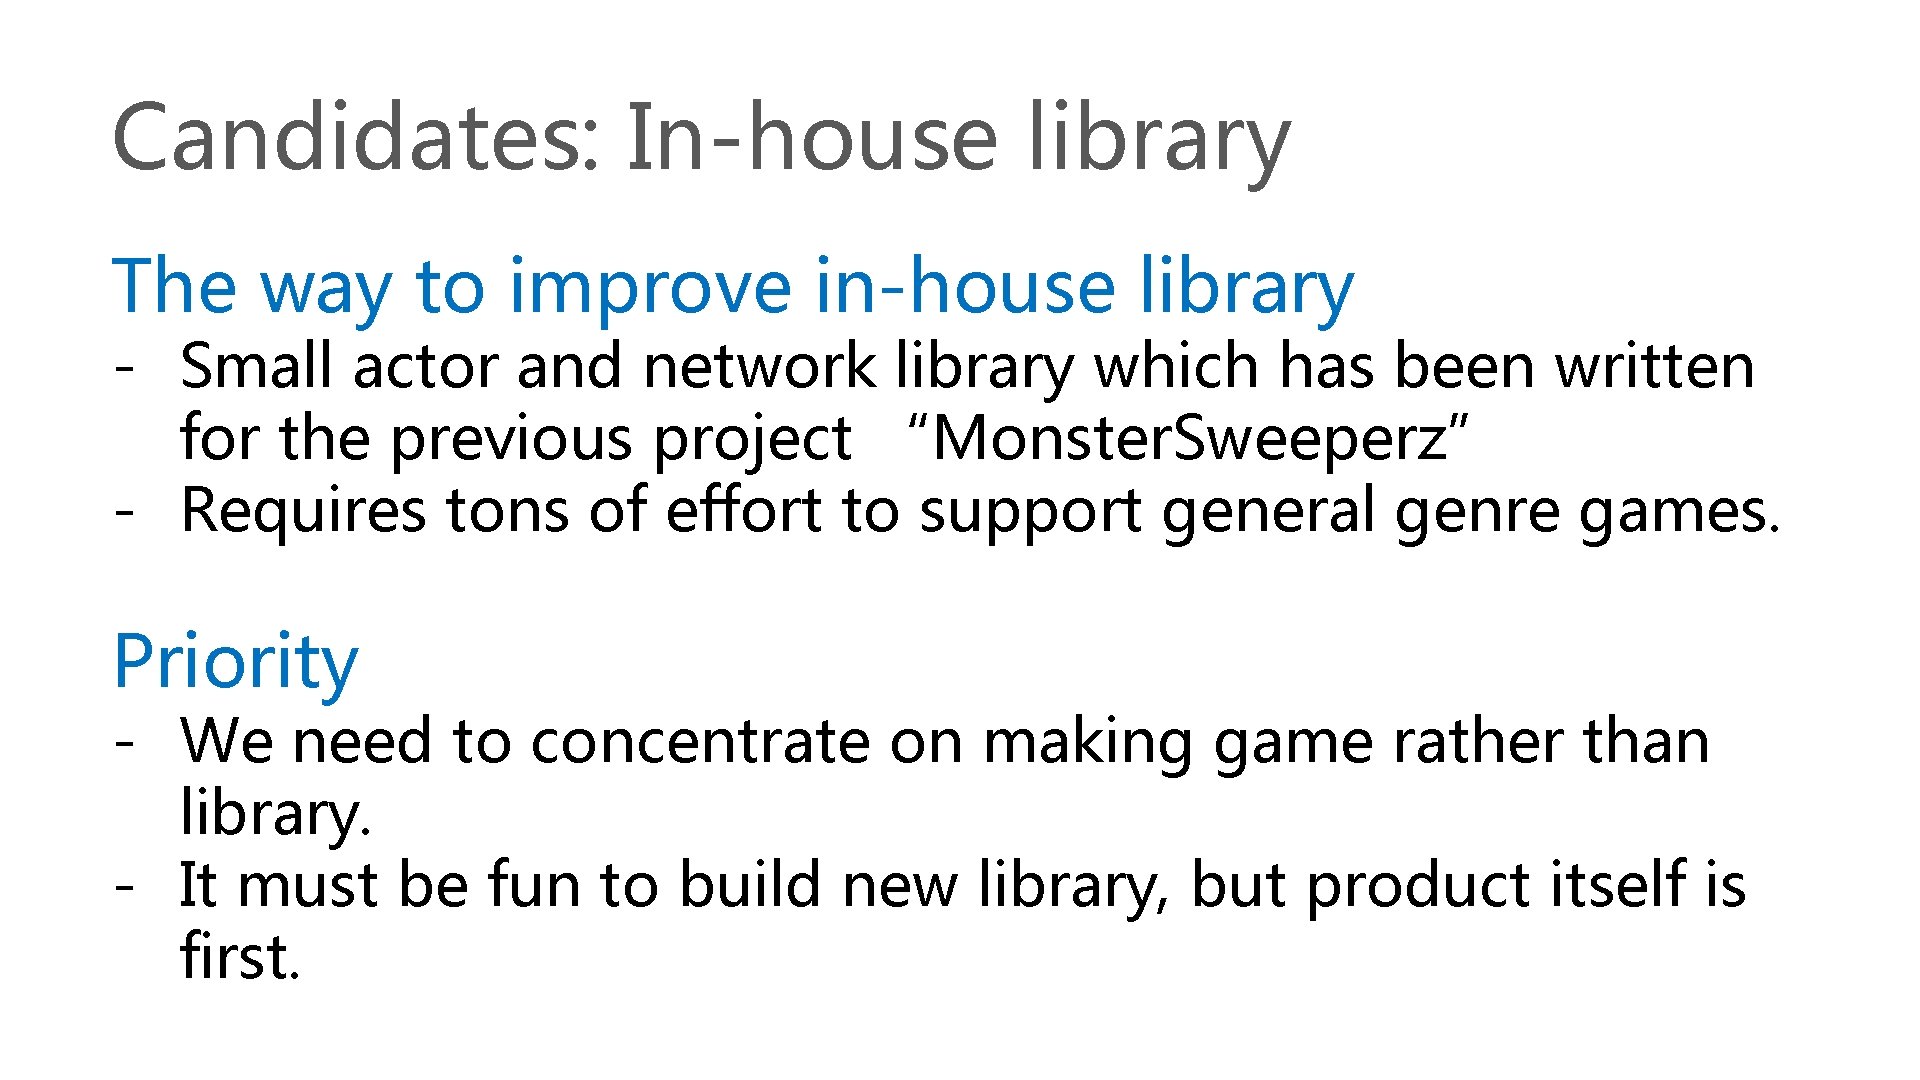 Candidates: In-house library The way to improve in-house library - Small actor and network